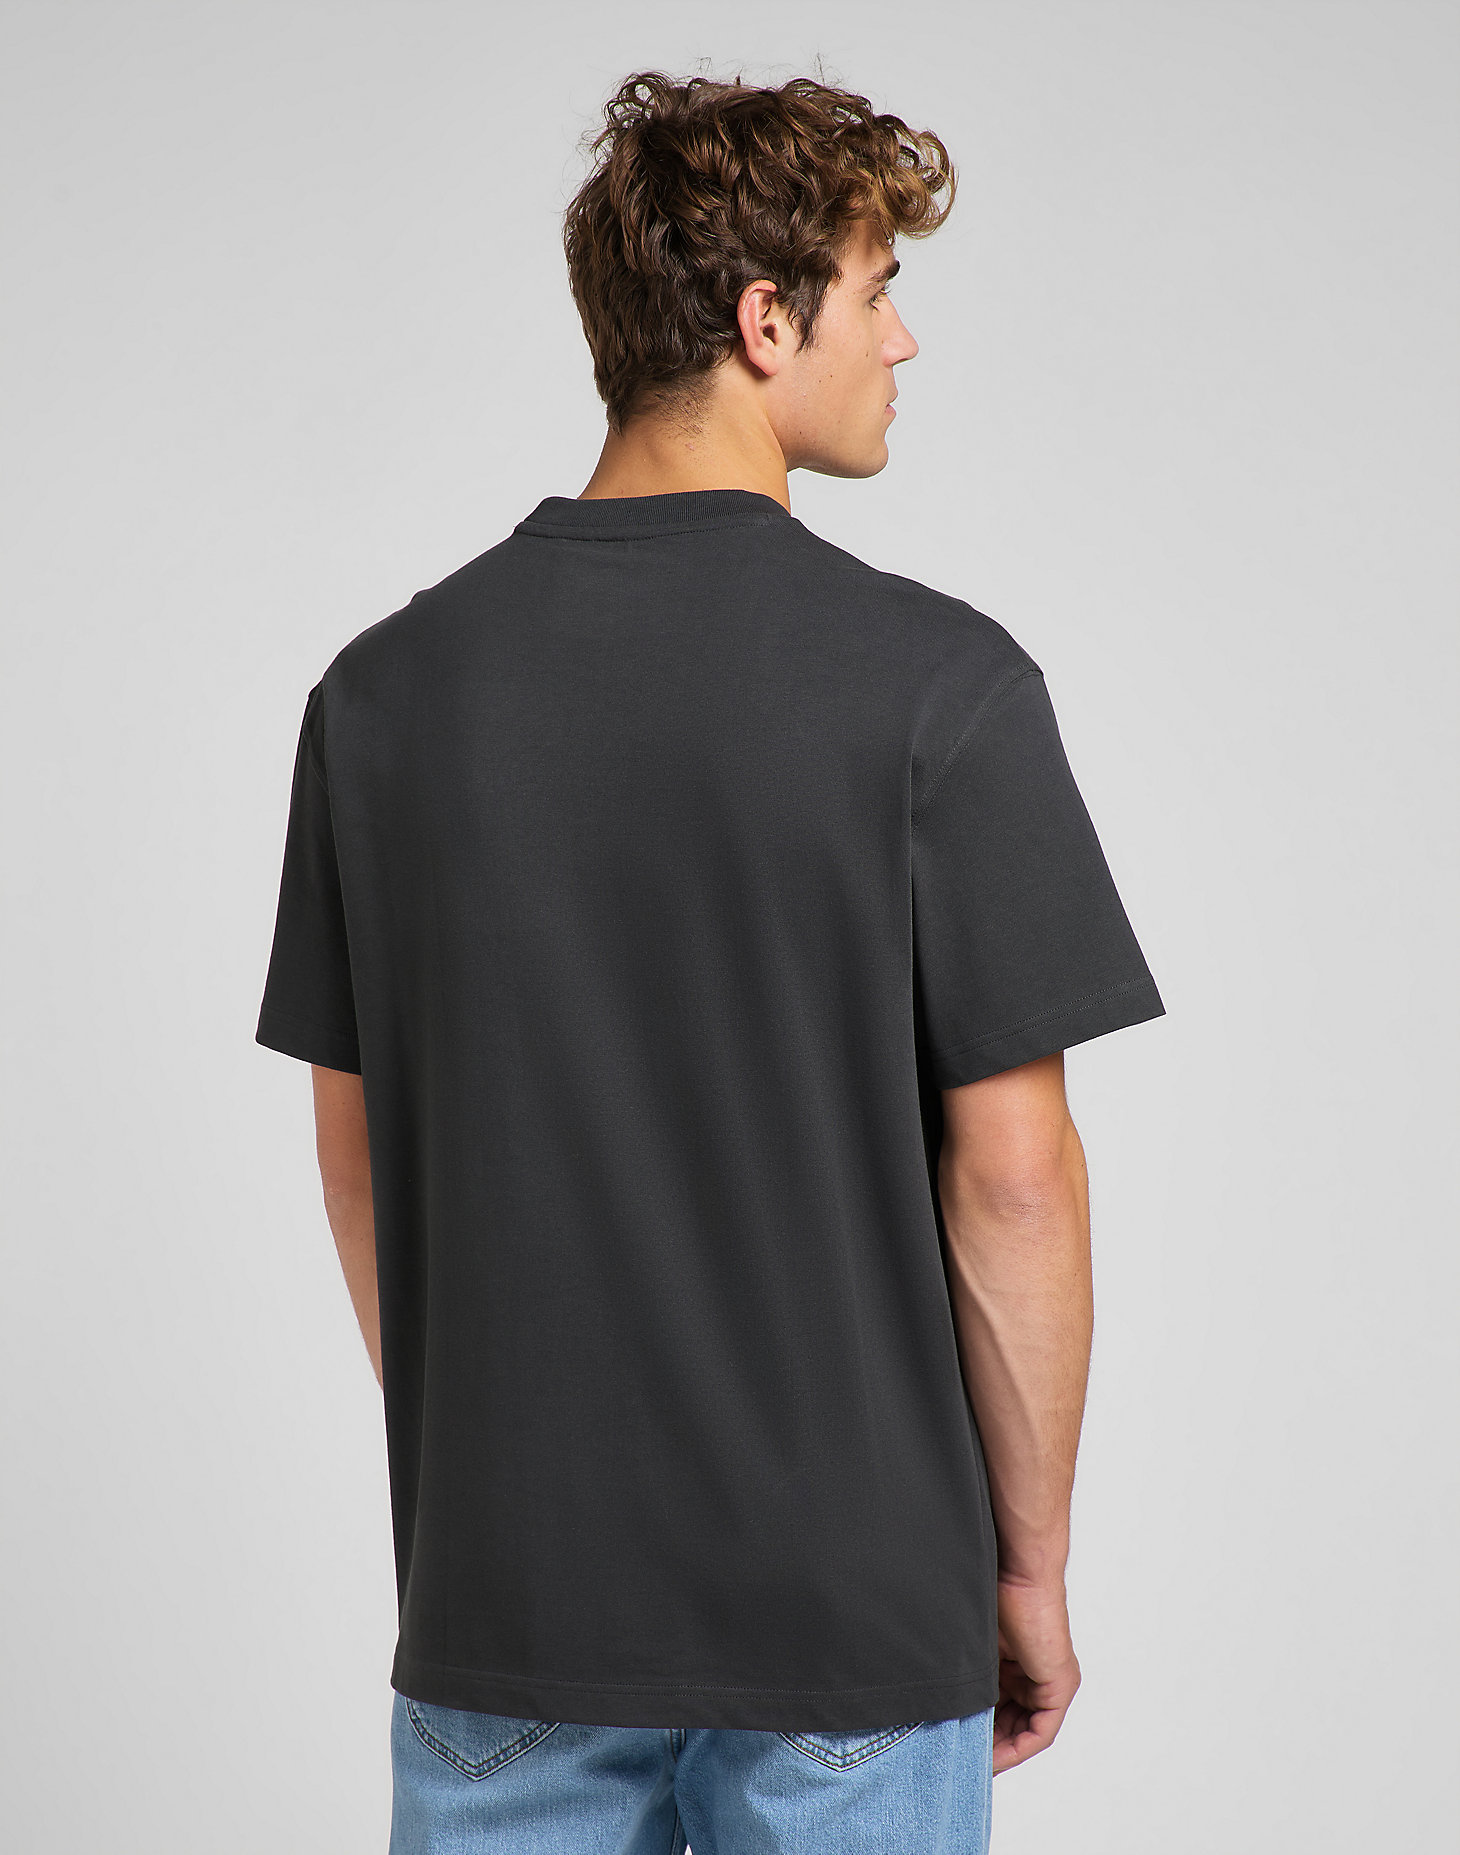 Core Loose Tee in Washed Black alternative view 3